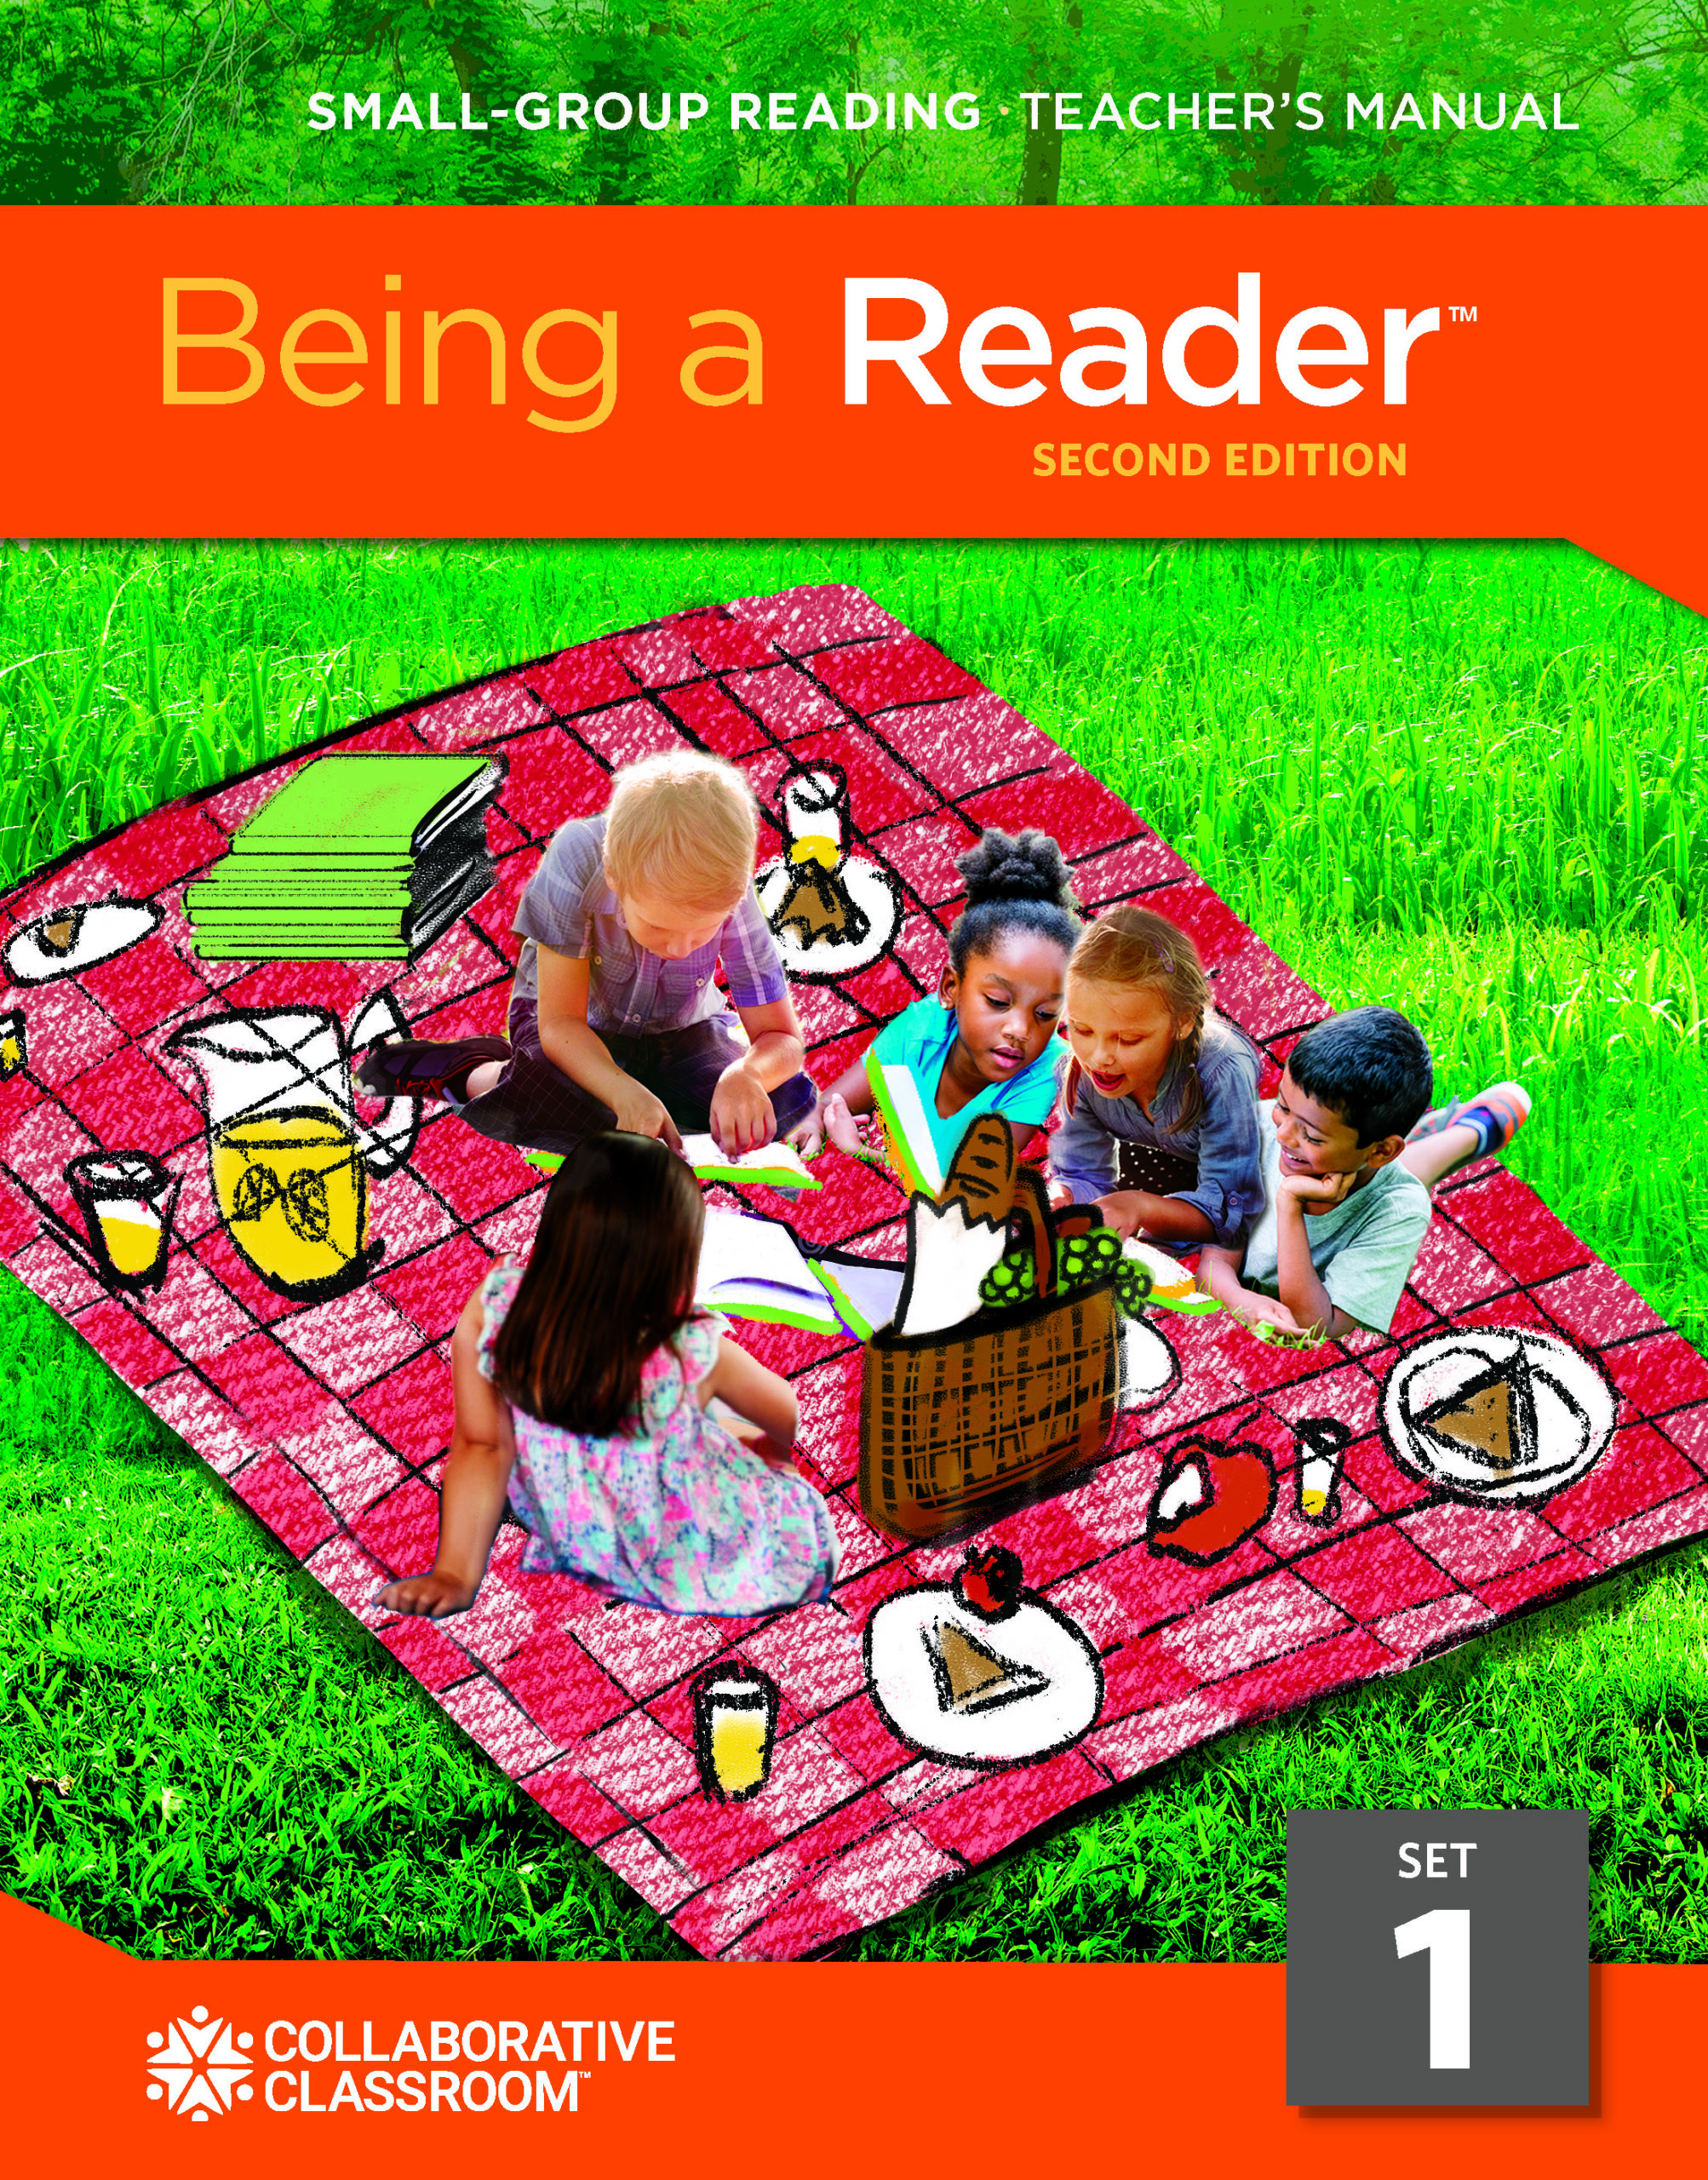 Being a Reader teacher and student materials book covers